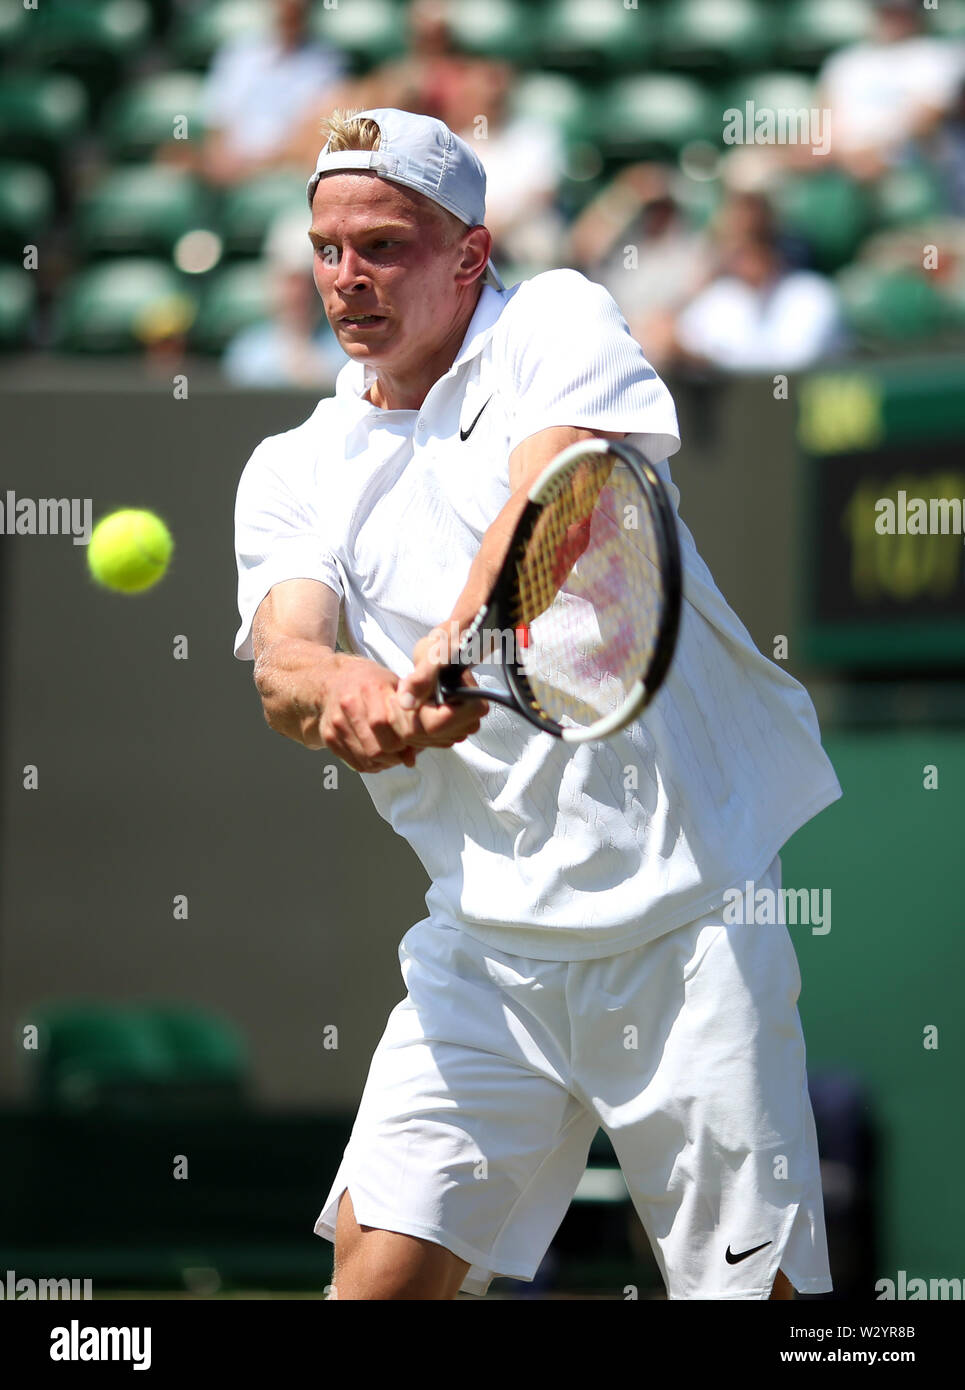 Anton Matusevich in the junior quarter final match on of the Wimbledon Championships at the All England Lawn Tennis and Croquet Club, London Stock Photo Alamy